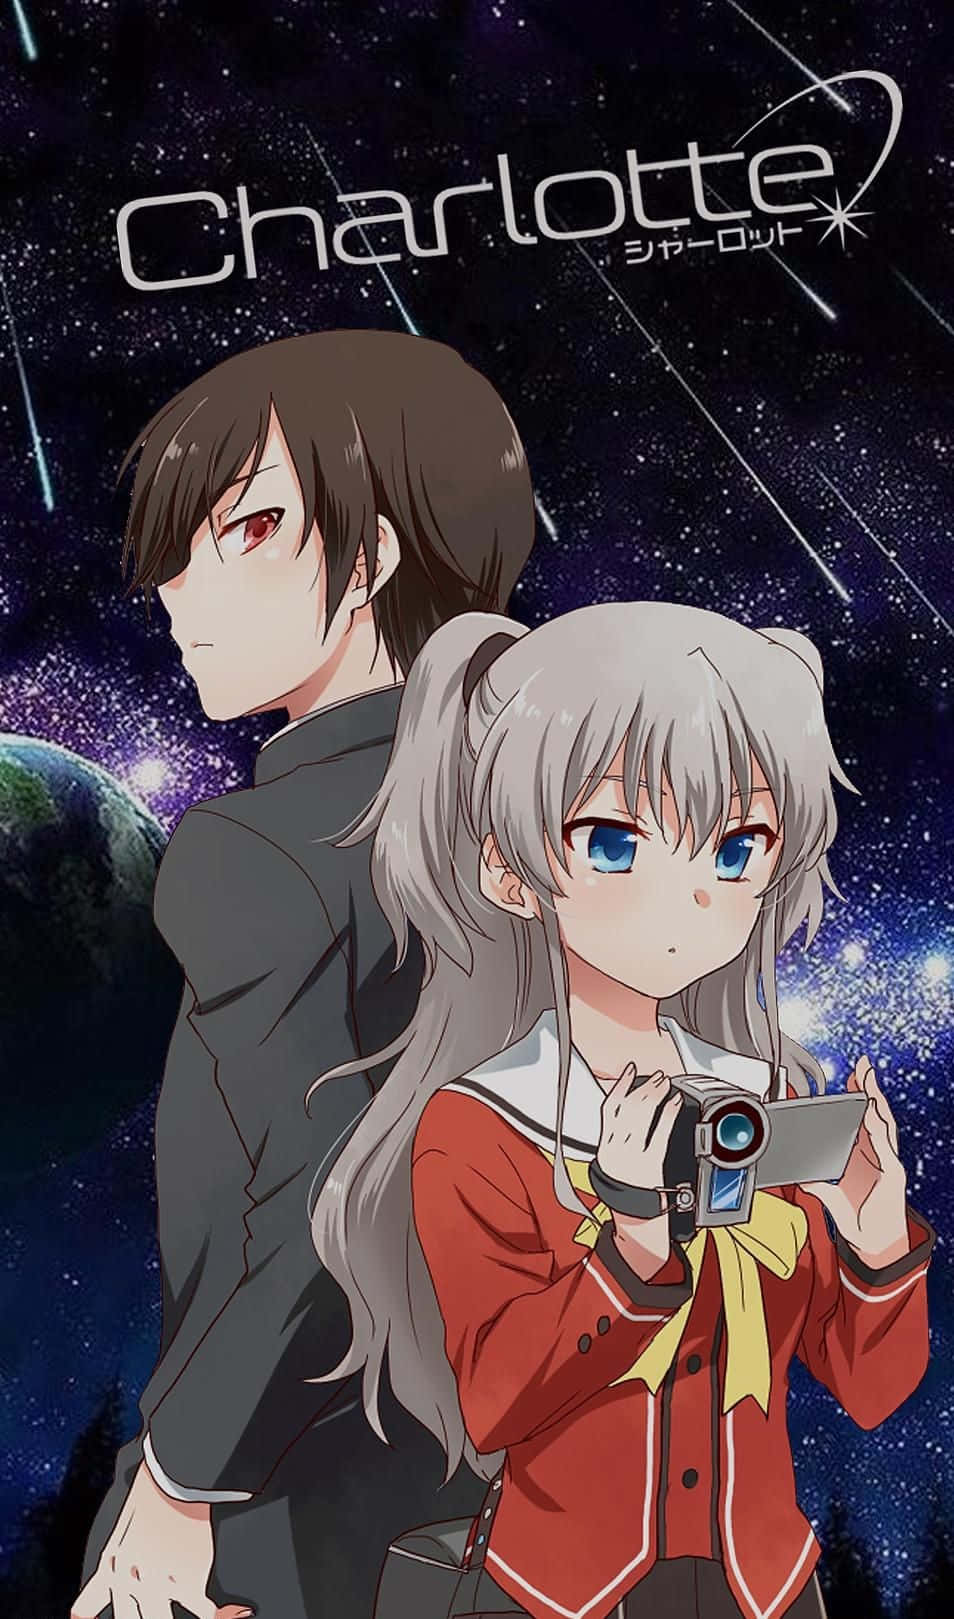 Synopsis of Anime CHARLOTTE 2015, Story of School Children with Superpowers  due to Comet Radiation